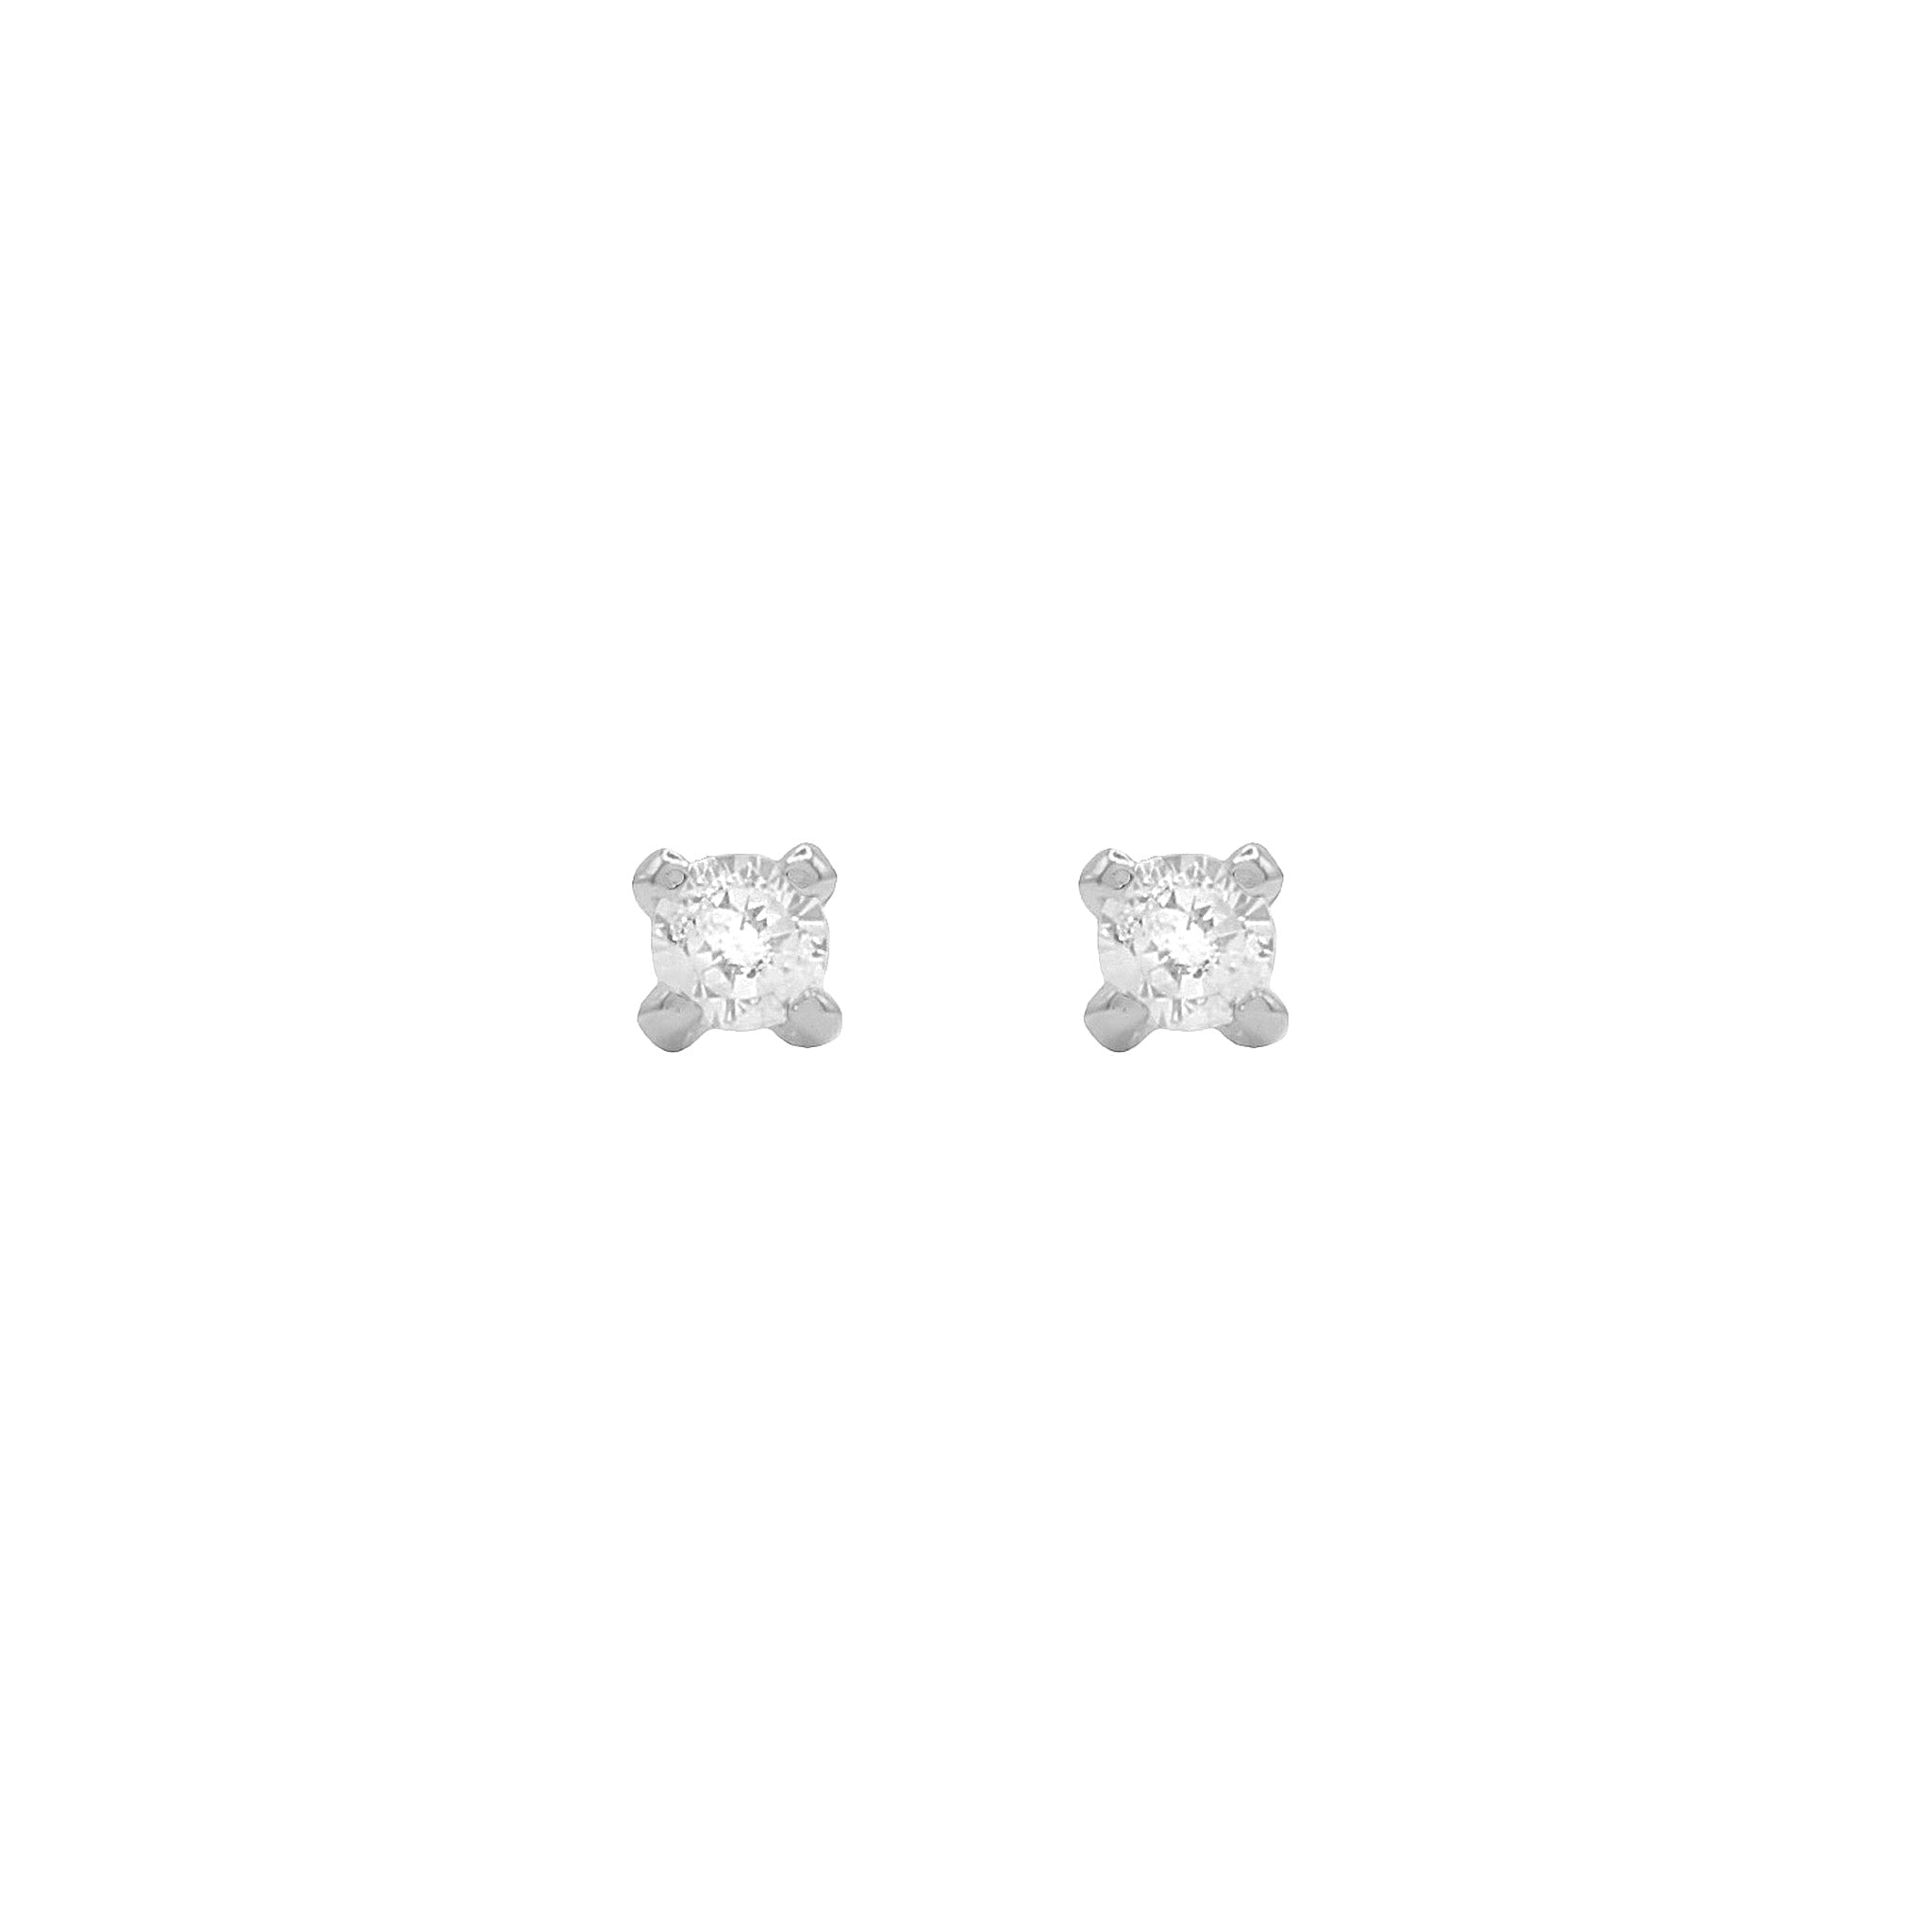 BABY CRYSTAL STUDS - SILVER